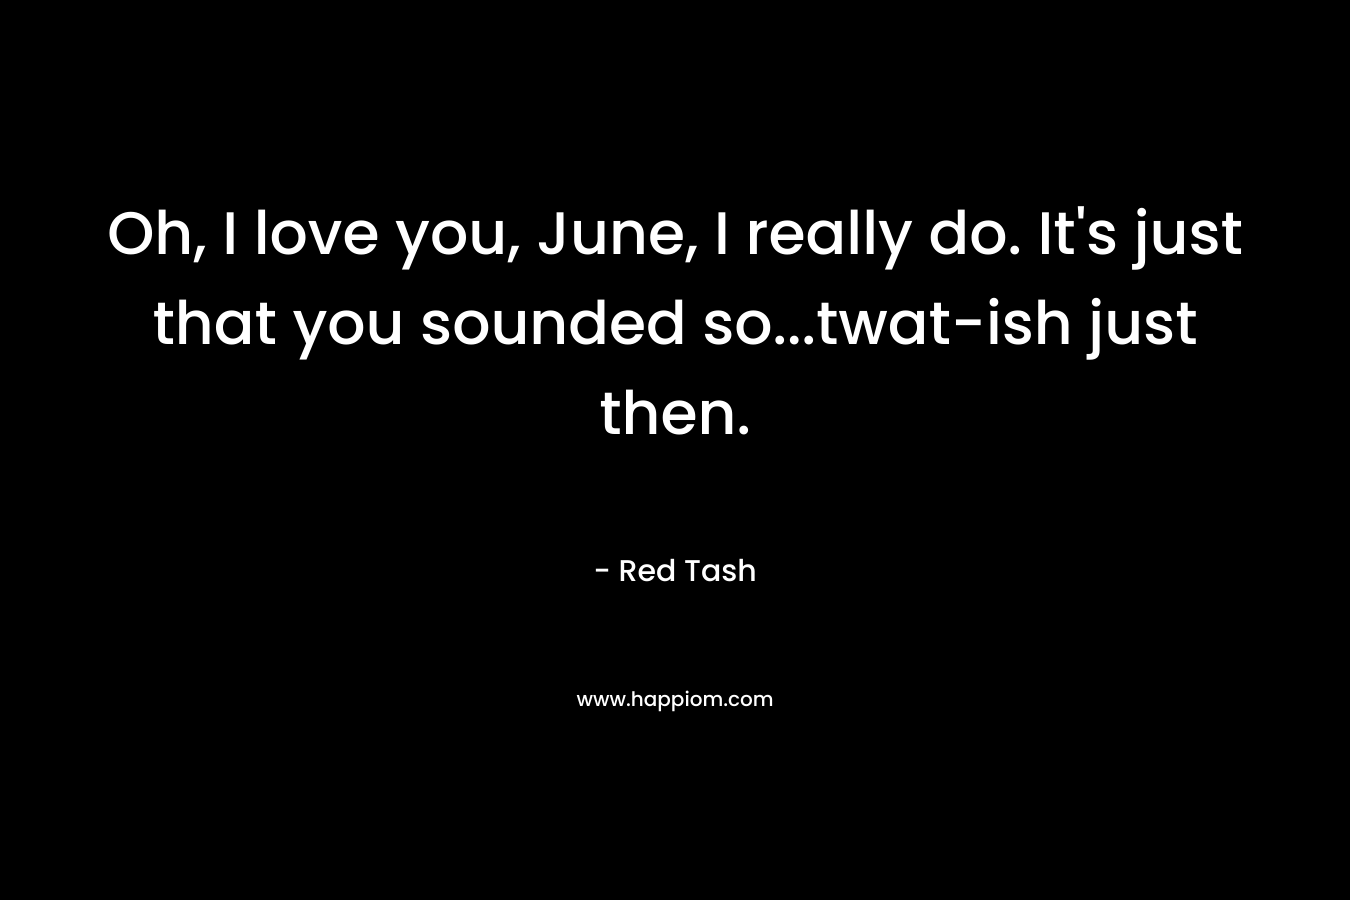 Oh, I love you, June, I really do. It's just that you sounded so...twat-ish just then.